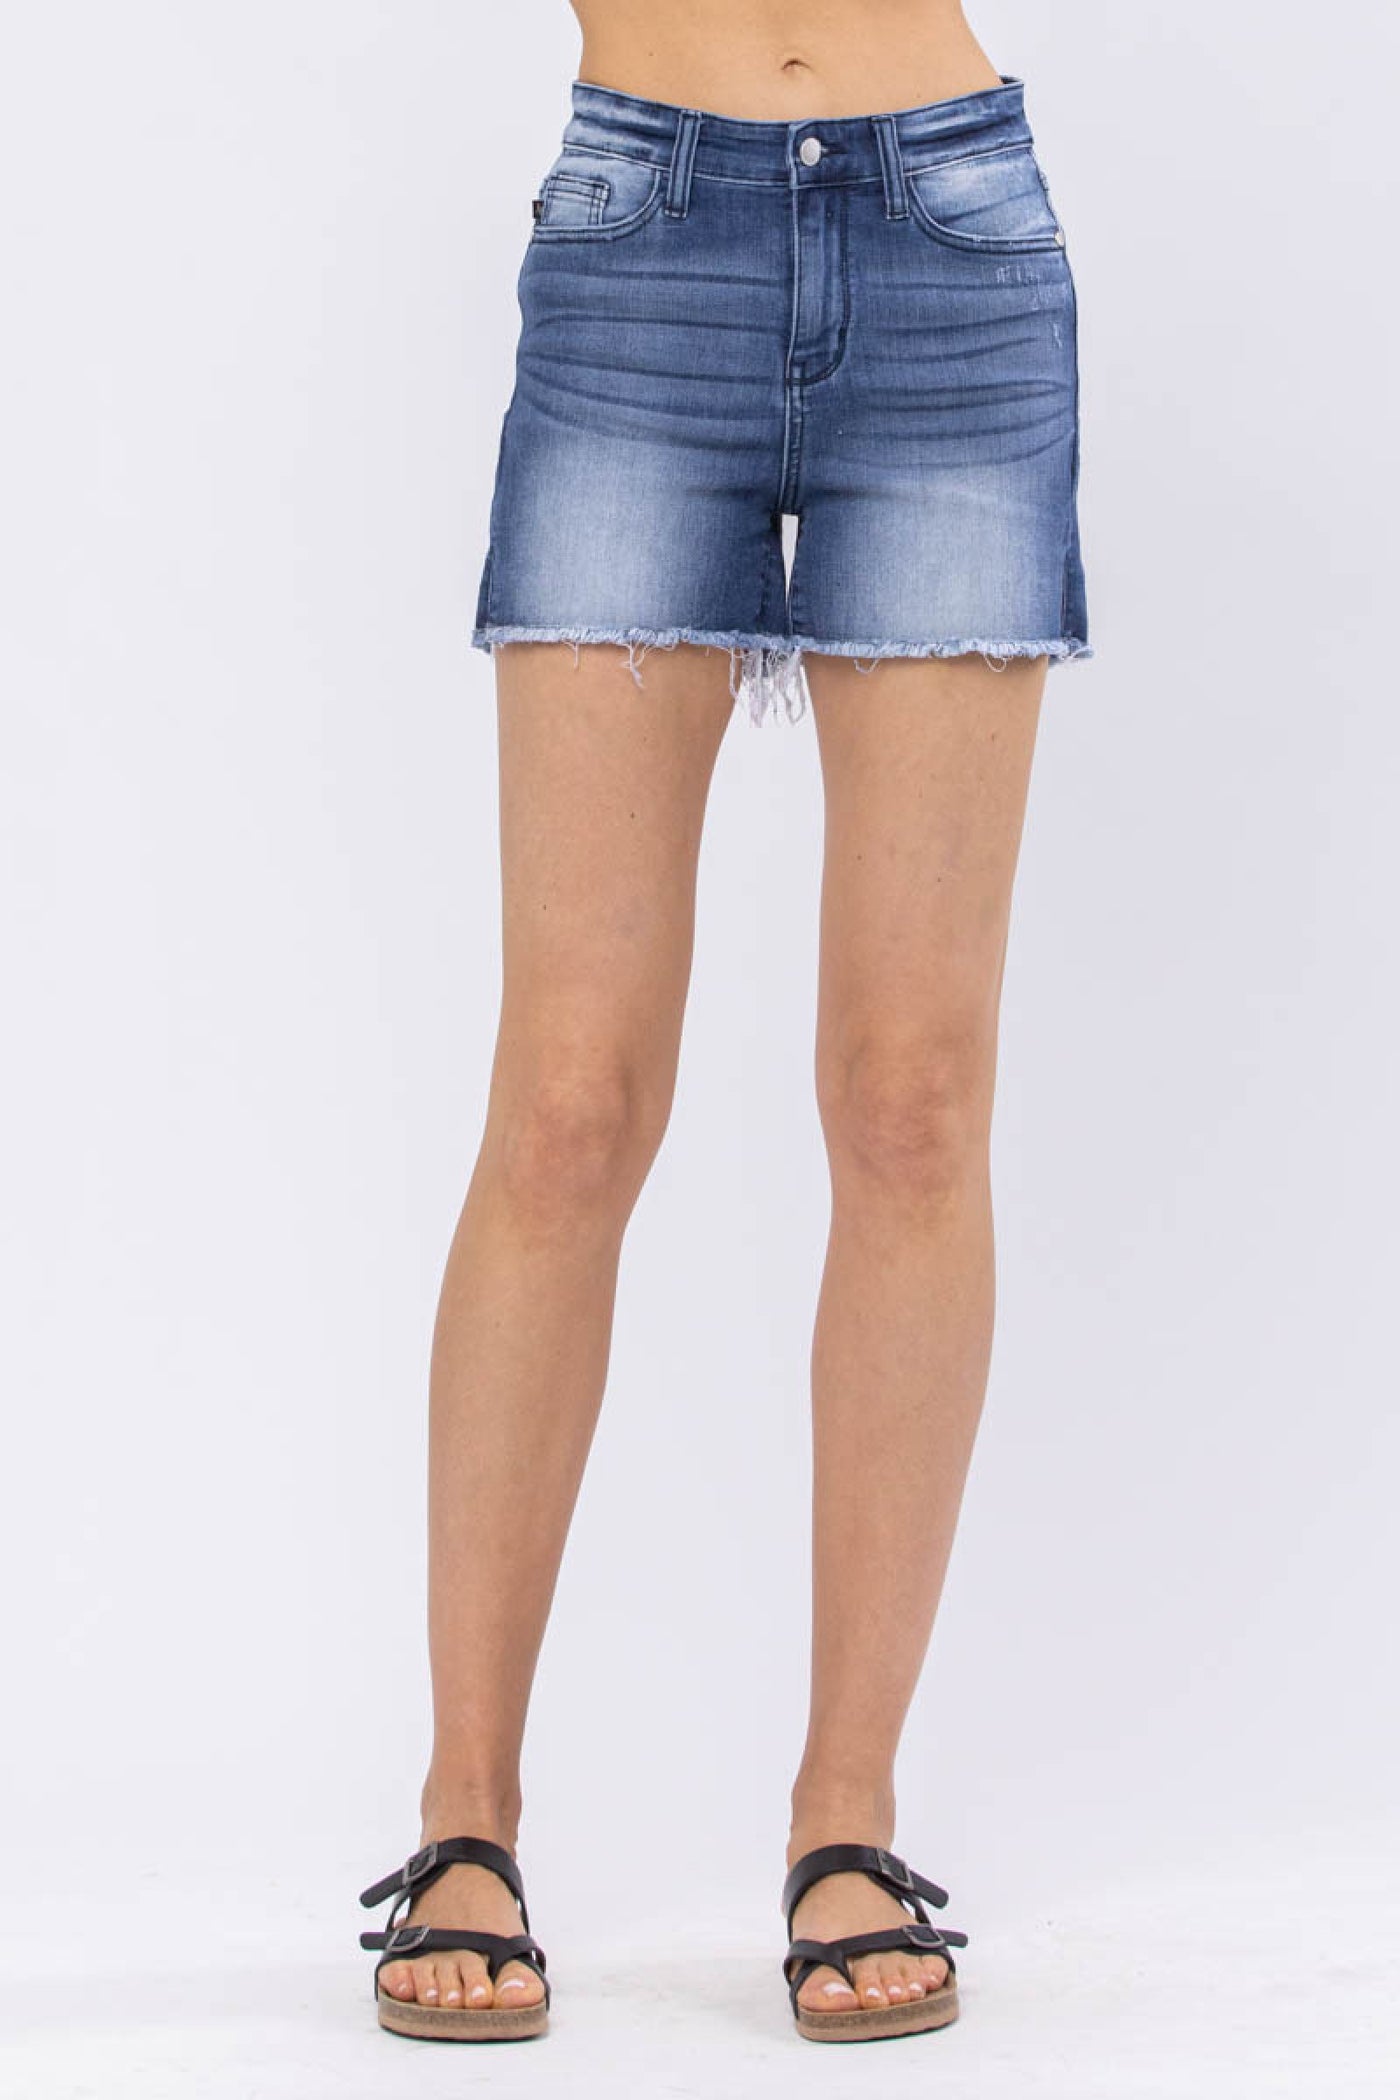 Judy Blue Side Slit Cut Off Shorts - Corinne Boutique Family Owned and Operated USA